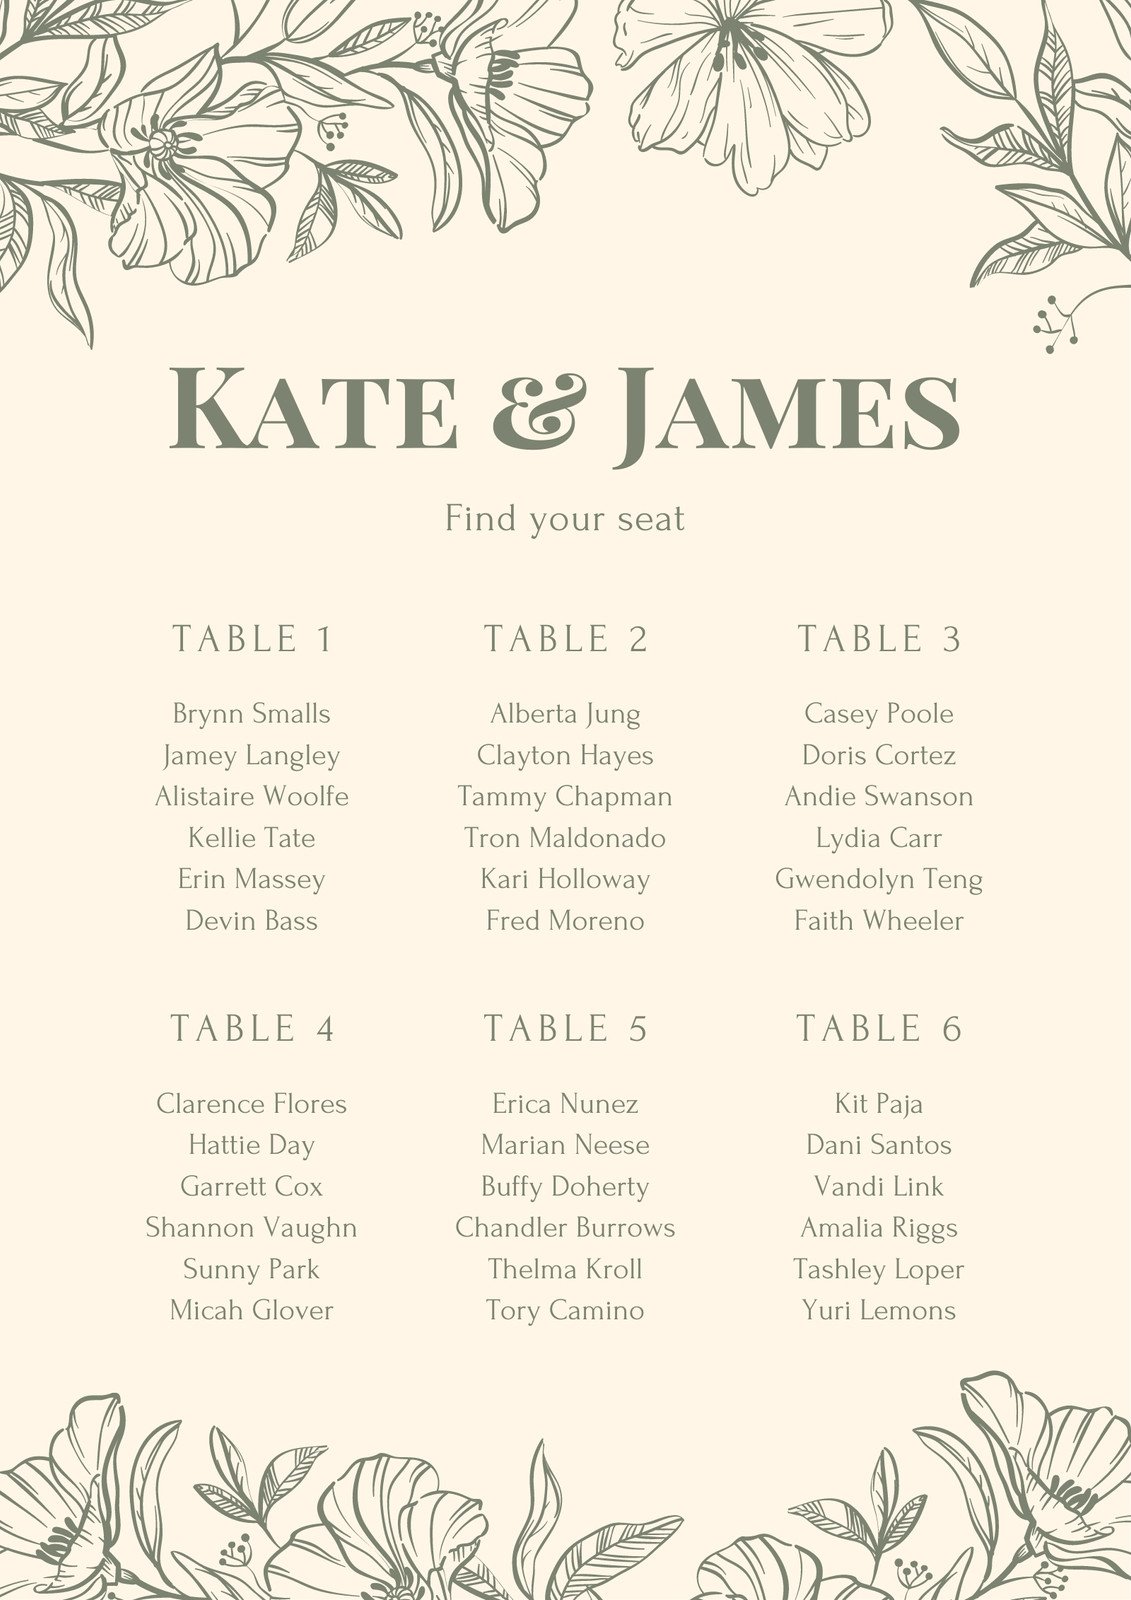 Army Green Floral Vintage Illustration Wedding Seating Chart